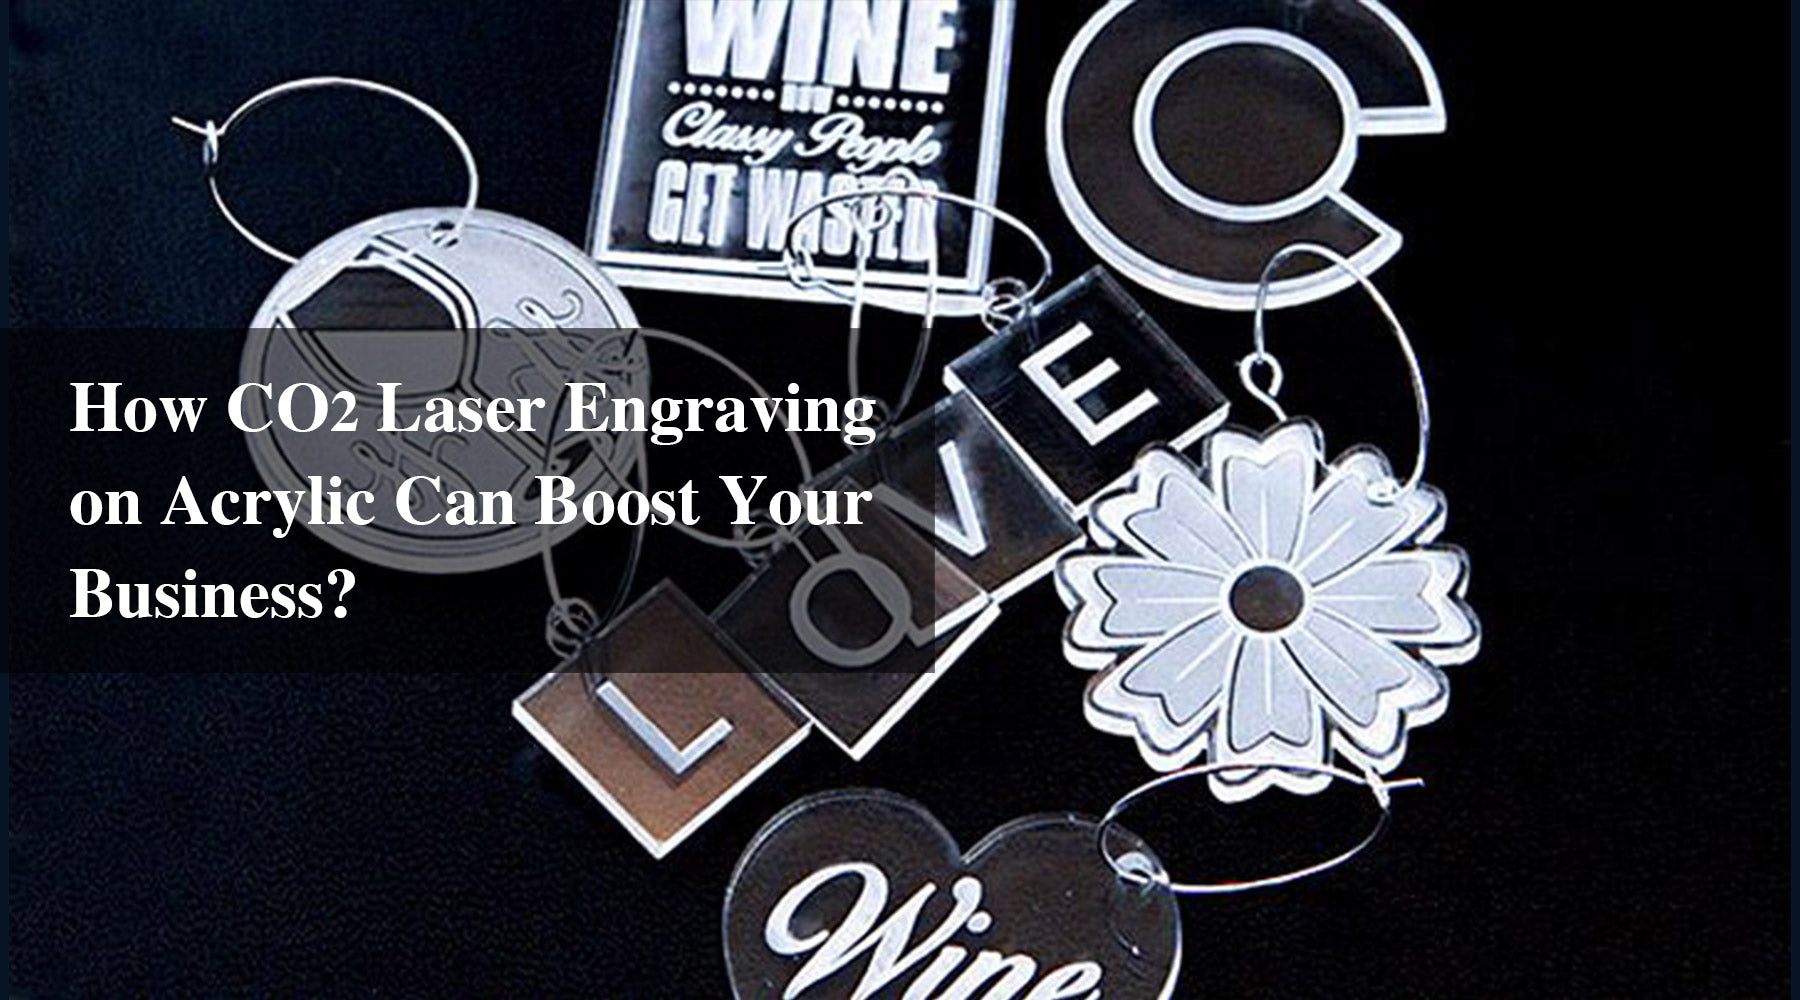 How CO2 Laser Engraving on Acrylic Can Boost Your Business?